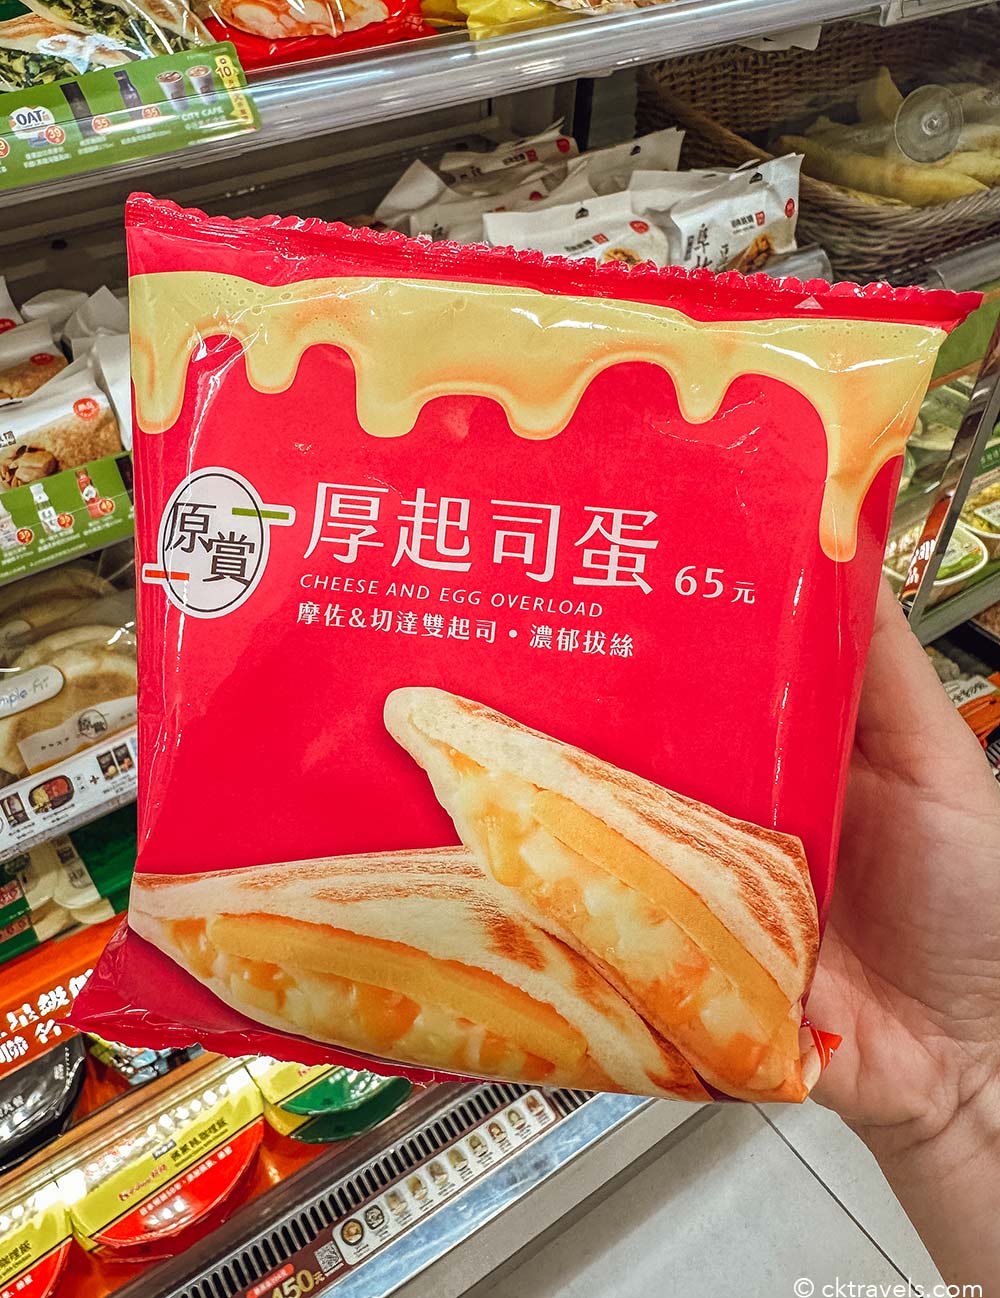 Cheese and egg overload toasted sandwich at Taiwan 7-Eleven